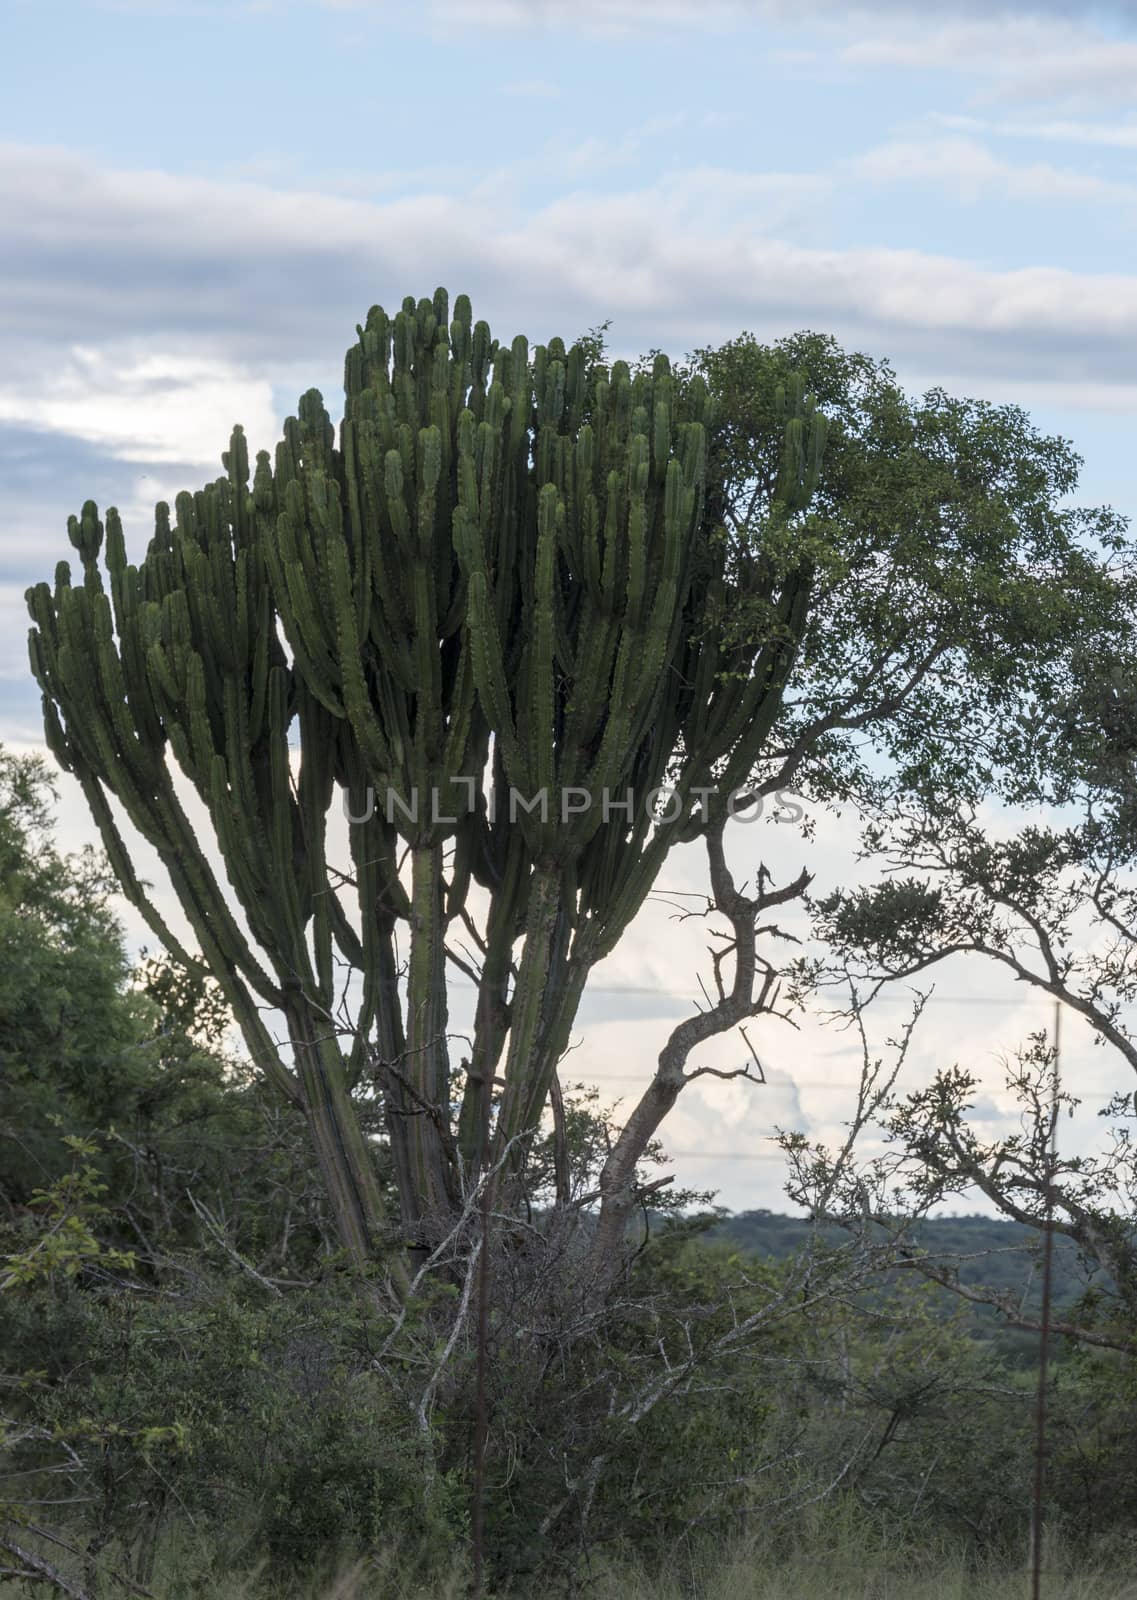 big cactus in south africa kruger national reserve with clouds sky